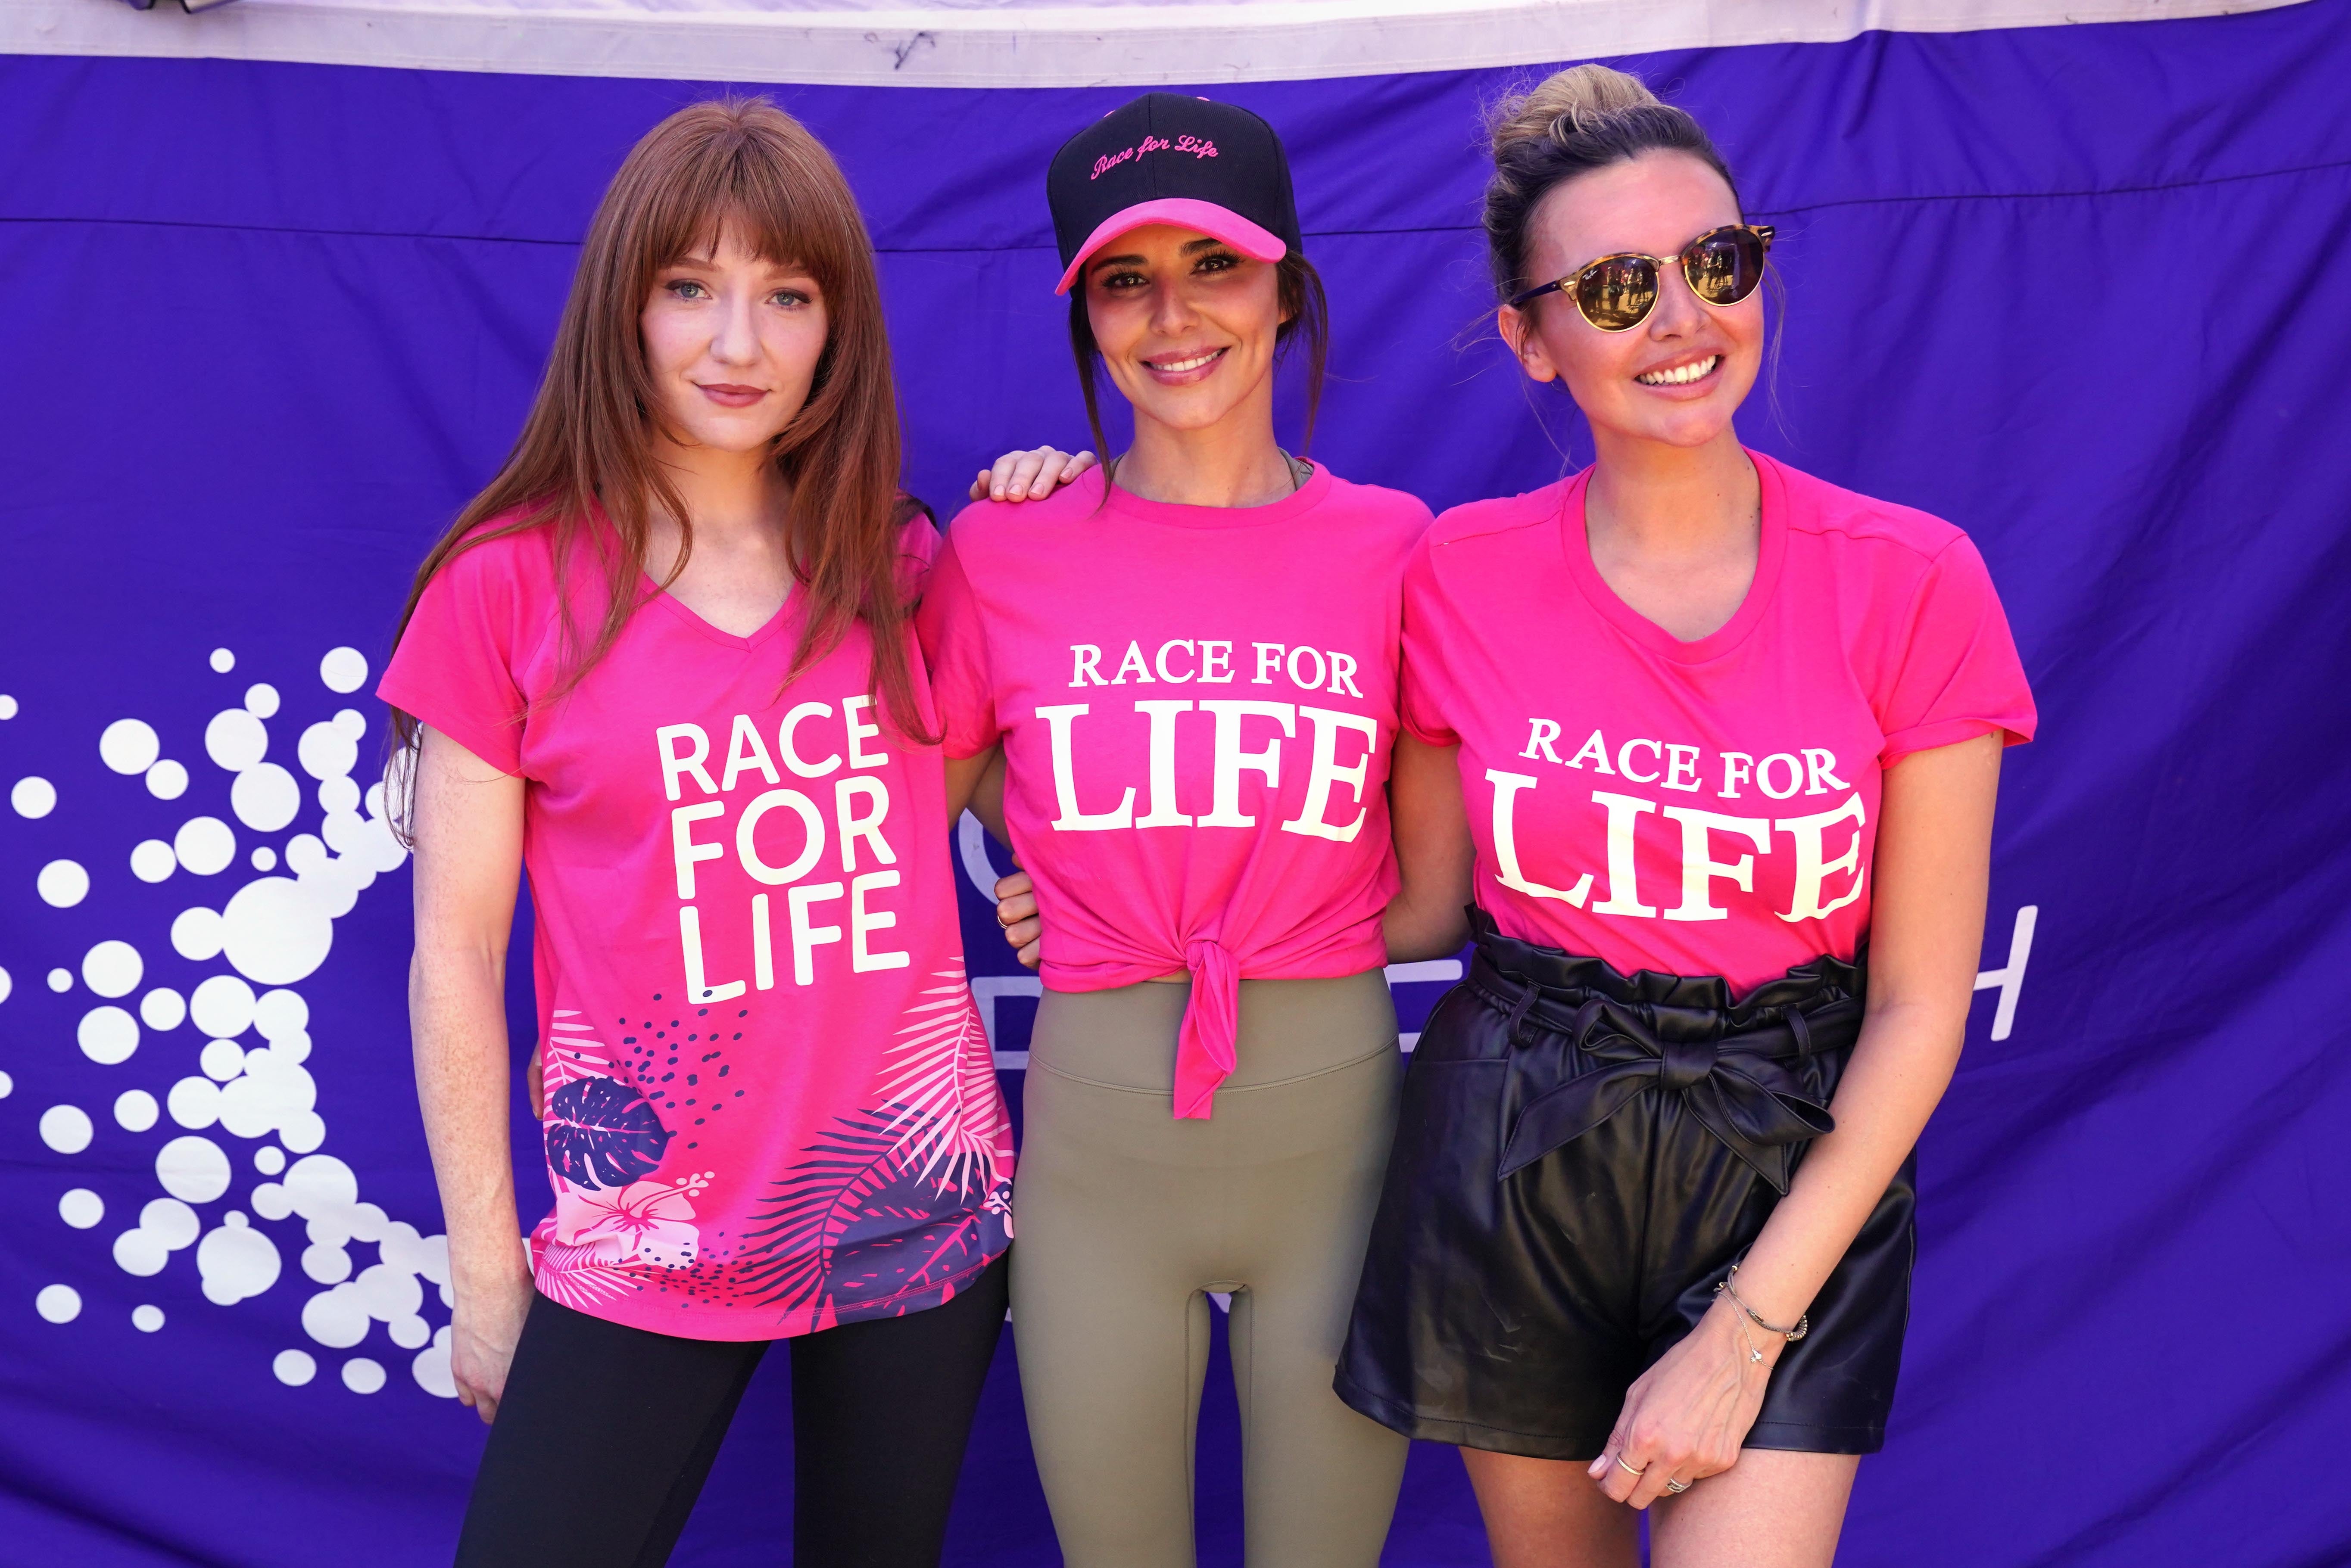 Former Girls Aloud band members Nicola Roberts, Cheryl and Nadine Coyle take part in Race for Life for Sarah at Hyde Park (Jonathan Brady/PA)